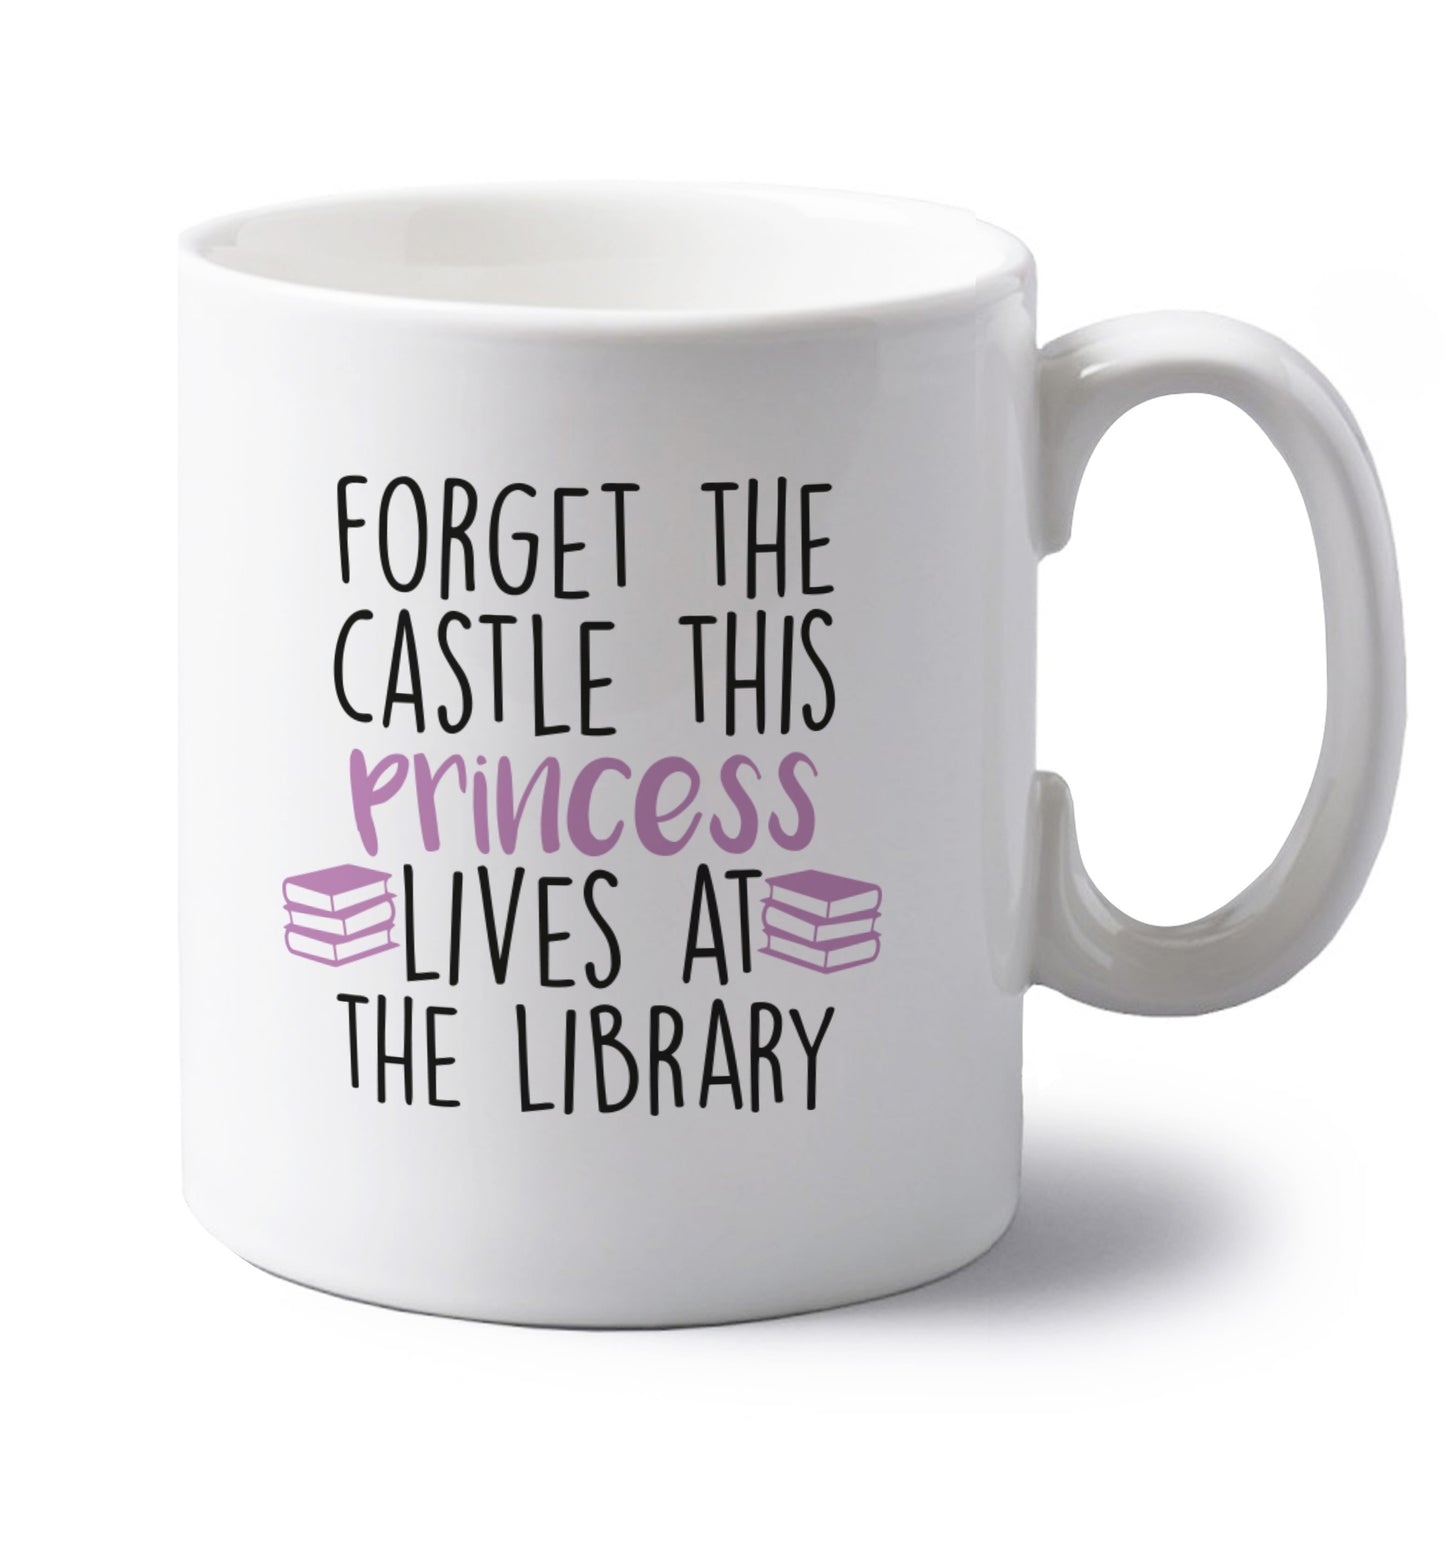 Forget the castle this princess lives at the library left handed white ceramic mug 